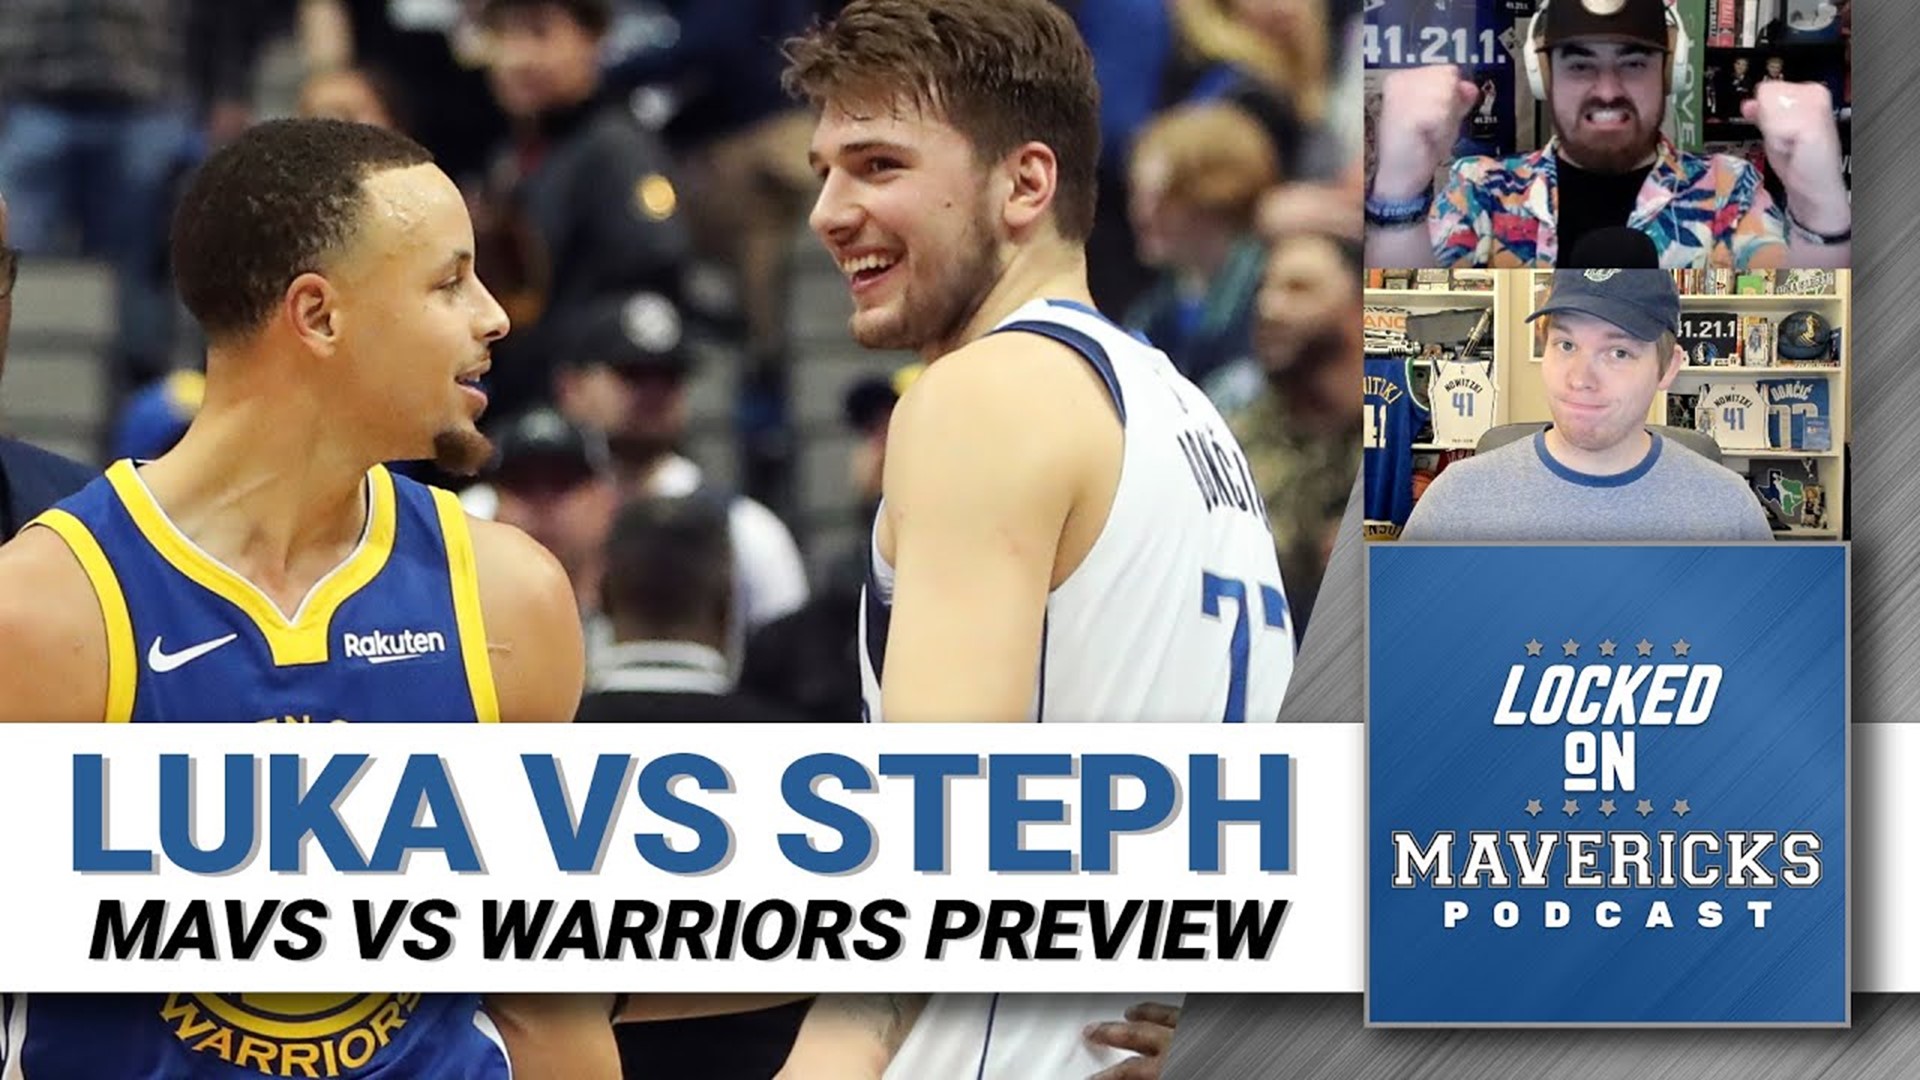 Nick Angstadt & Isaac Harris preview the Mavs vs Dubs series. Who are the Warriors now? How are Curry, Klay, and Dray different?